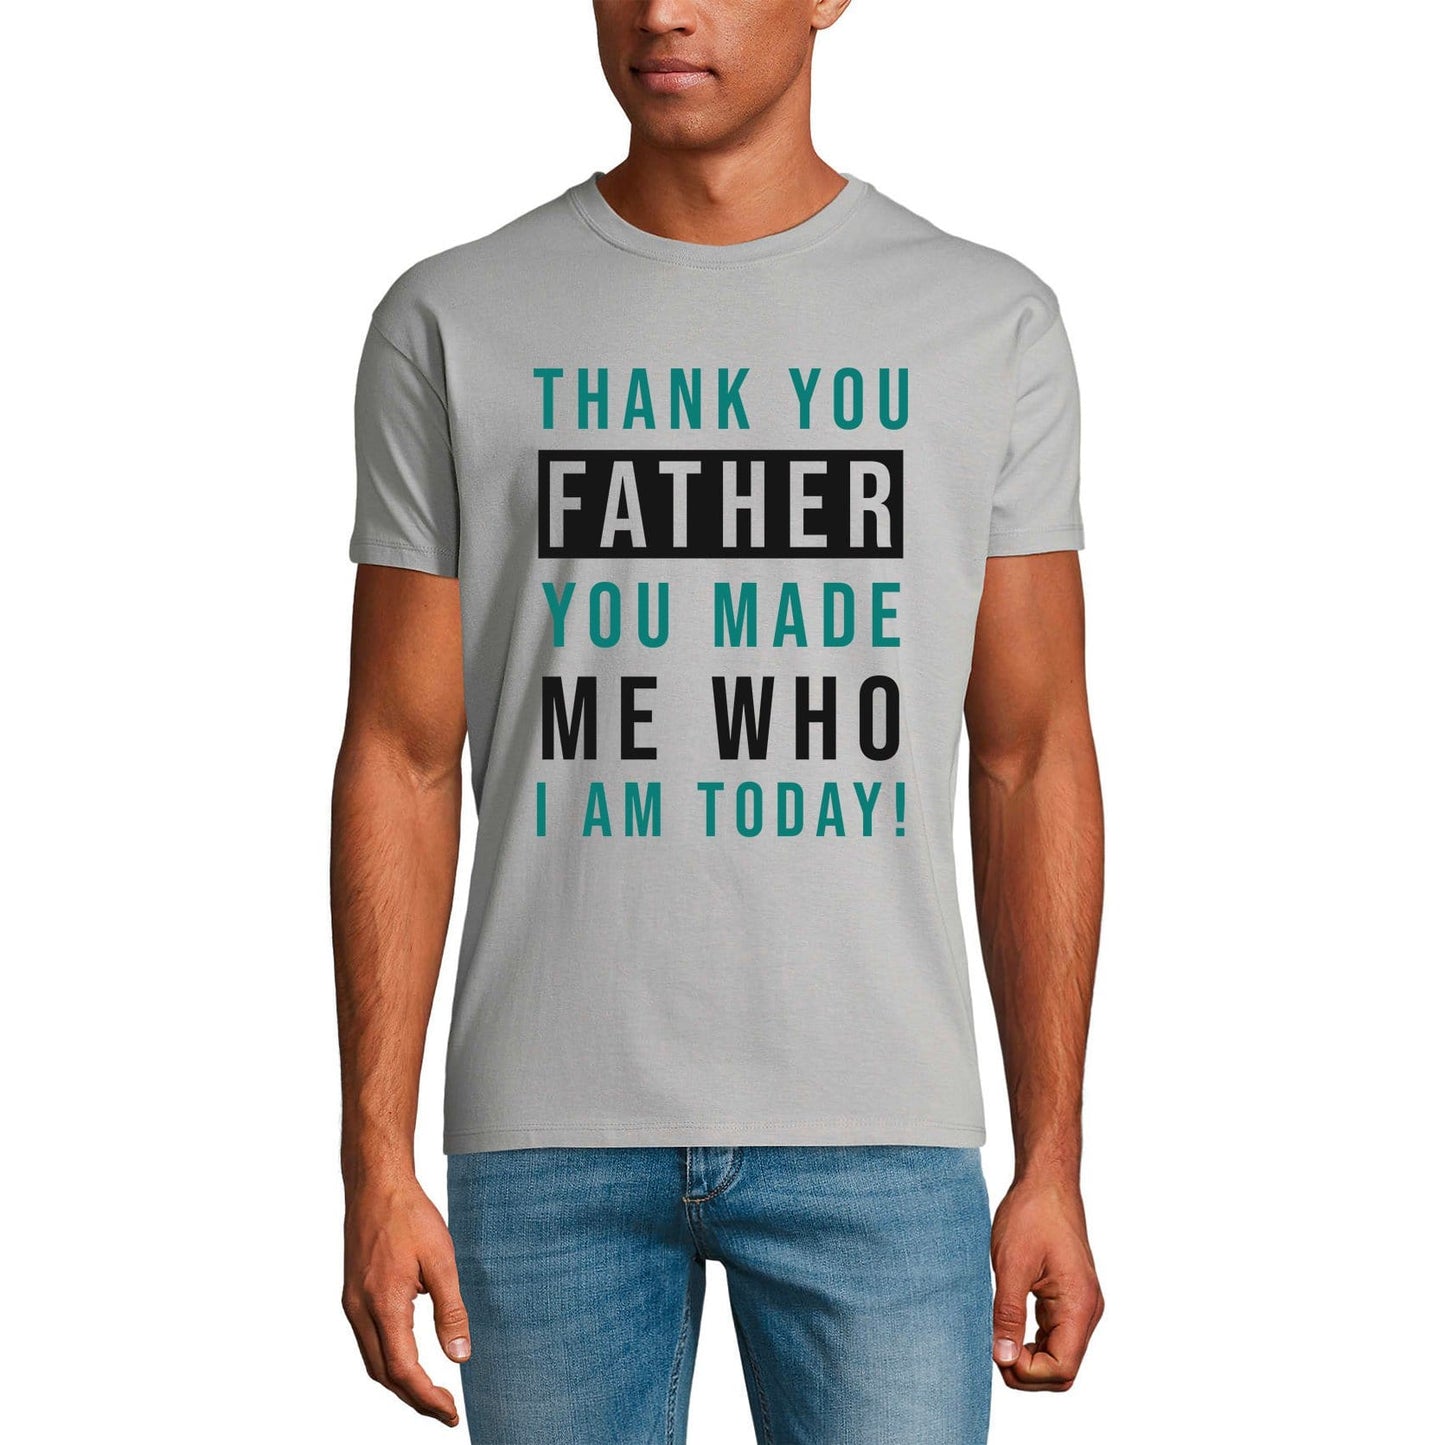 ULTRABASIC Graphic T-Shirt Thank You Father - Birthday Gift for Son